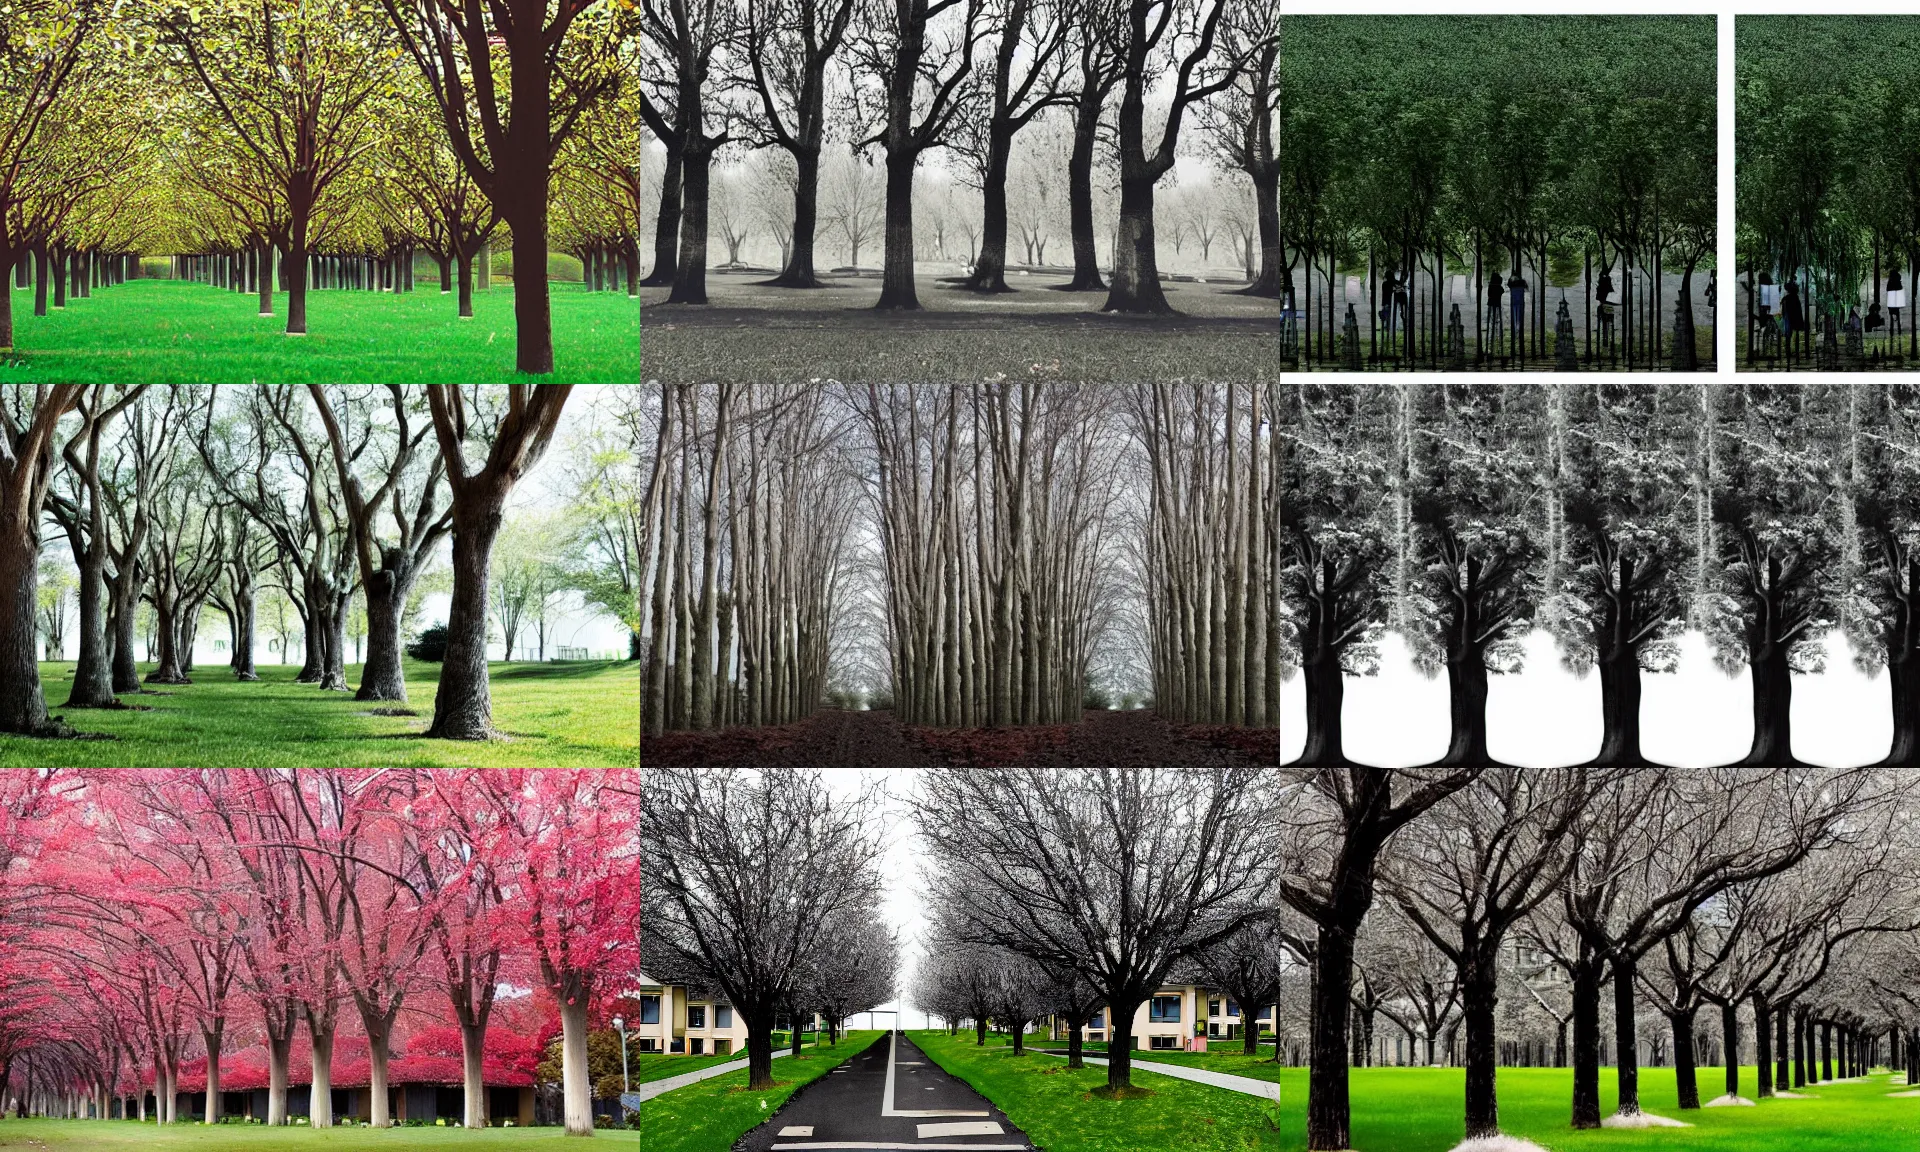 Prompt: Identical houses, identical people, identical trees, all the same